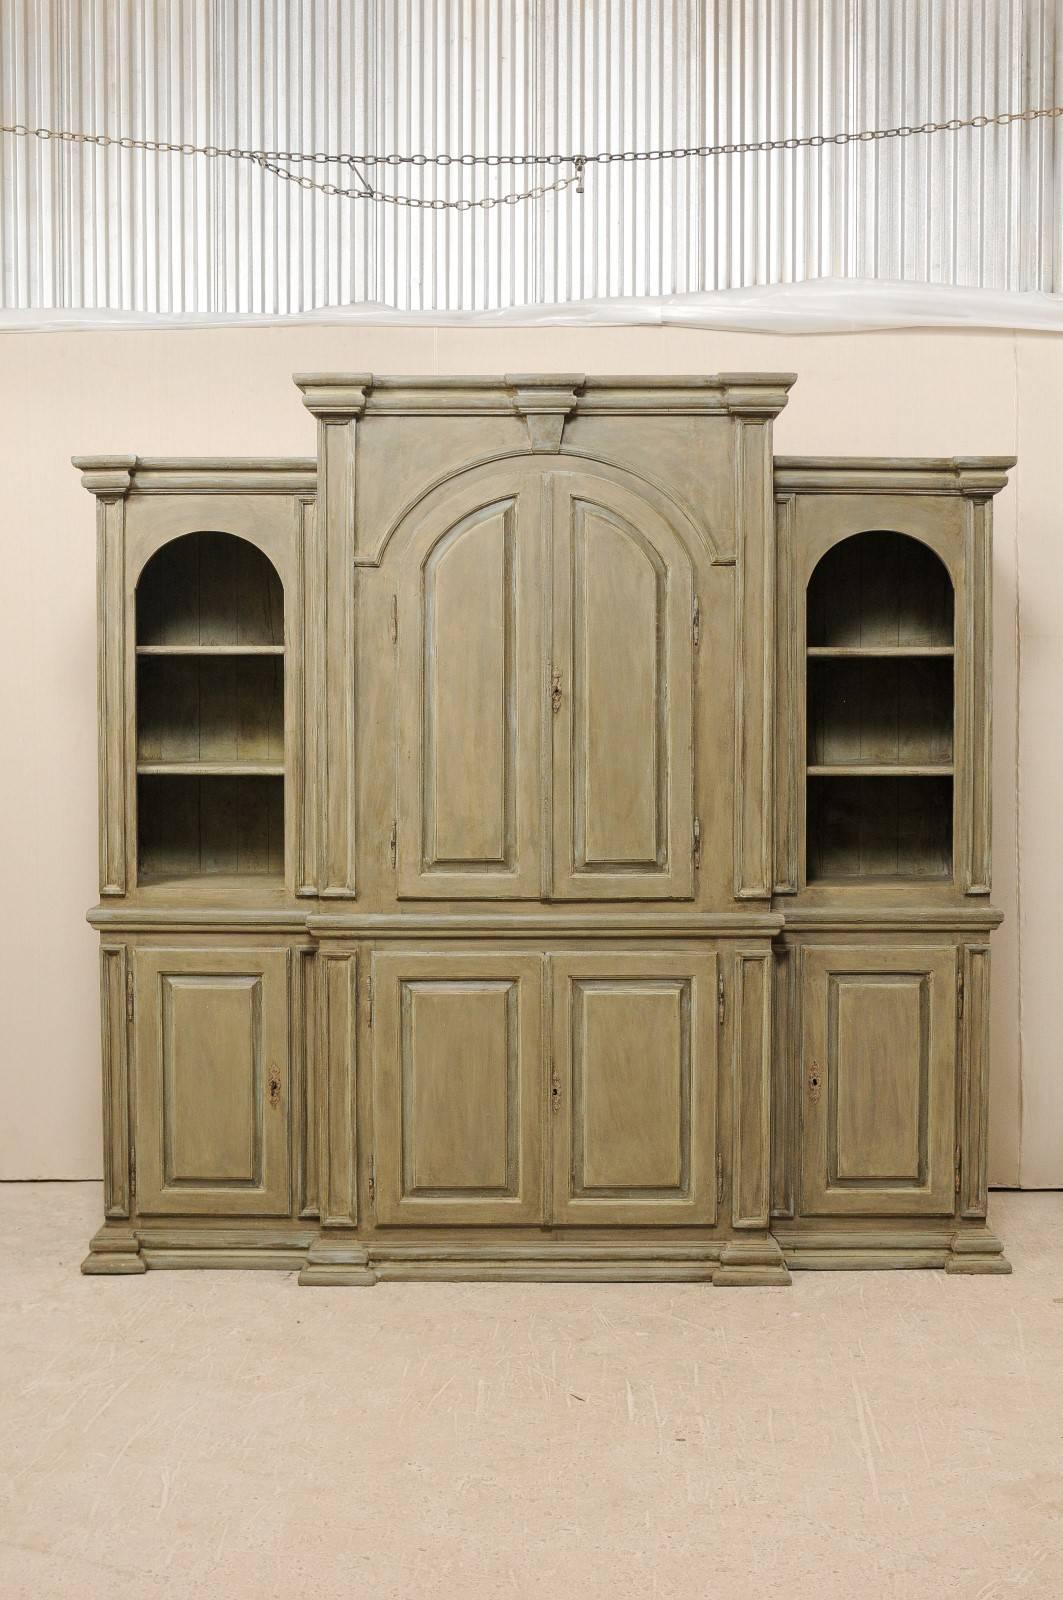 A large size Brazilian painted wood cabinet. This custom Brazilian cabinet has been constructed from old reclaimed wood. The cabinet features a larger mid-section which both steps up in height and steps out in depth from its flanking counterparts.